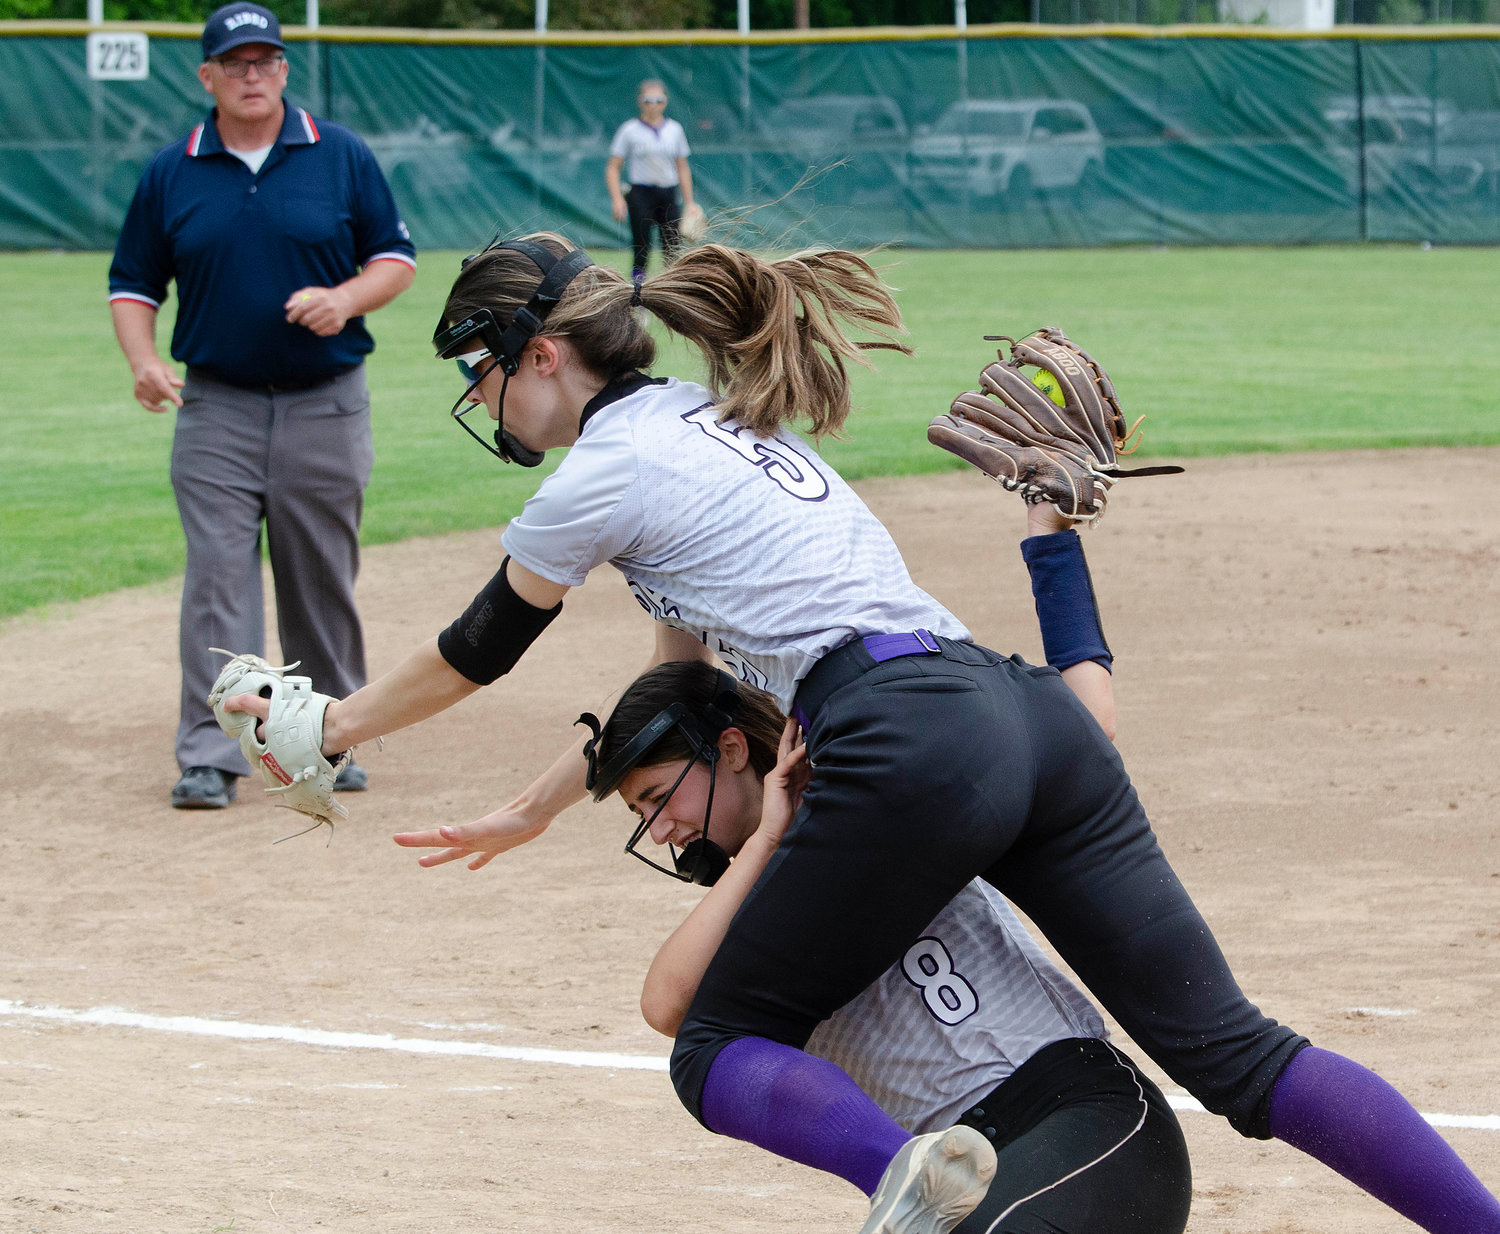 Huskies shortstop Julia Allen makes a catch for the second out of the eighth inning, despite being run over by third baseman Sydney Crowell as she vied for the ball.